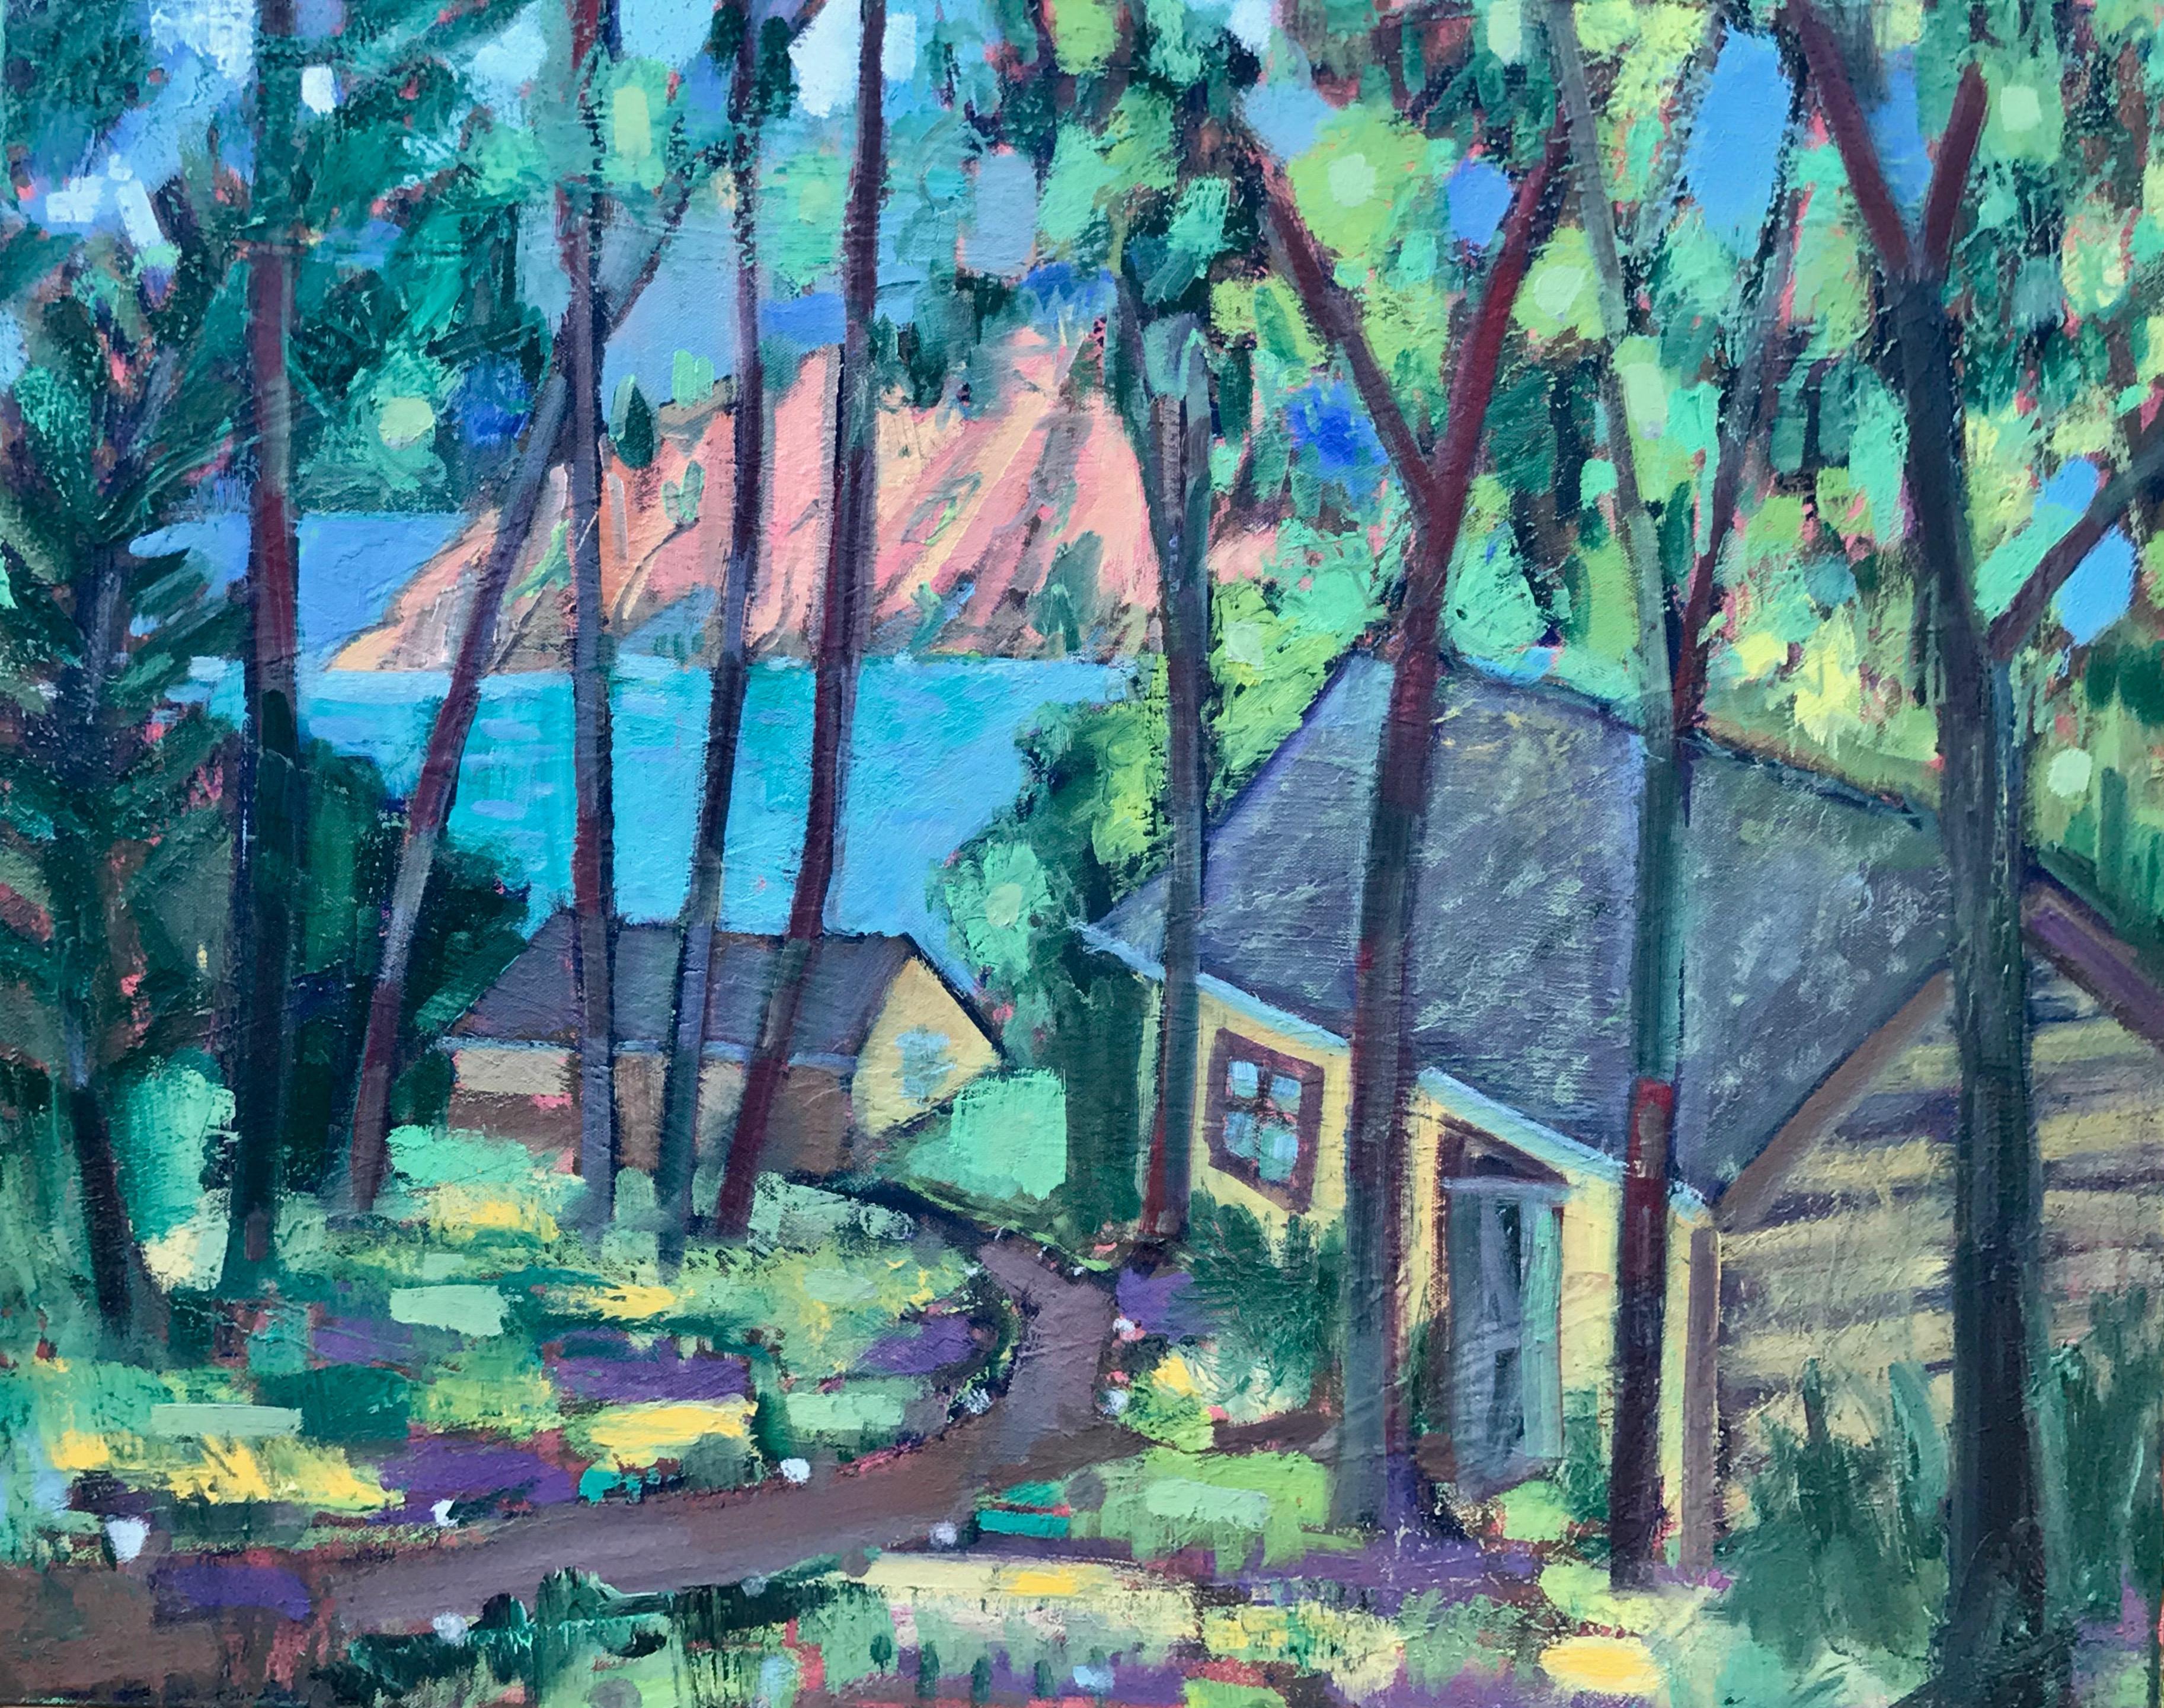 James Hartman Landscape Painting - Cabins by the Lake, Oil Painting